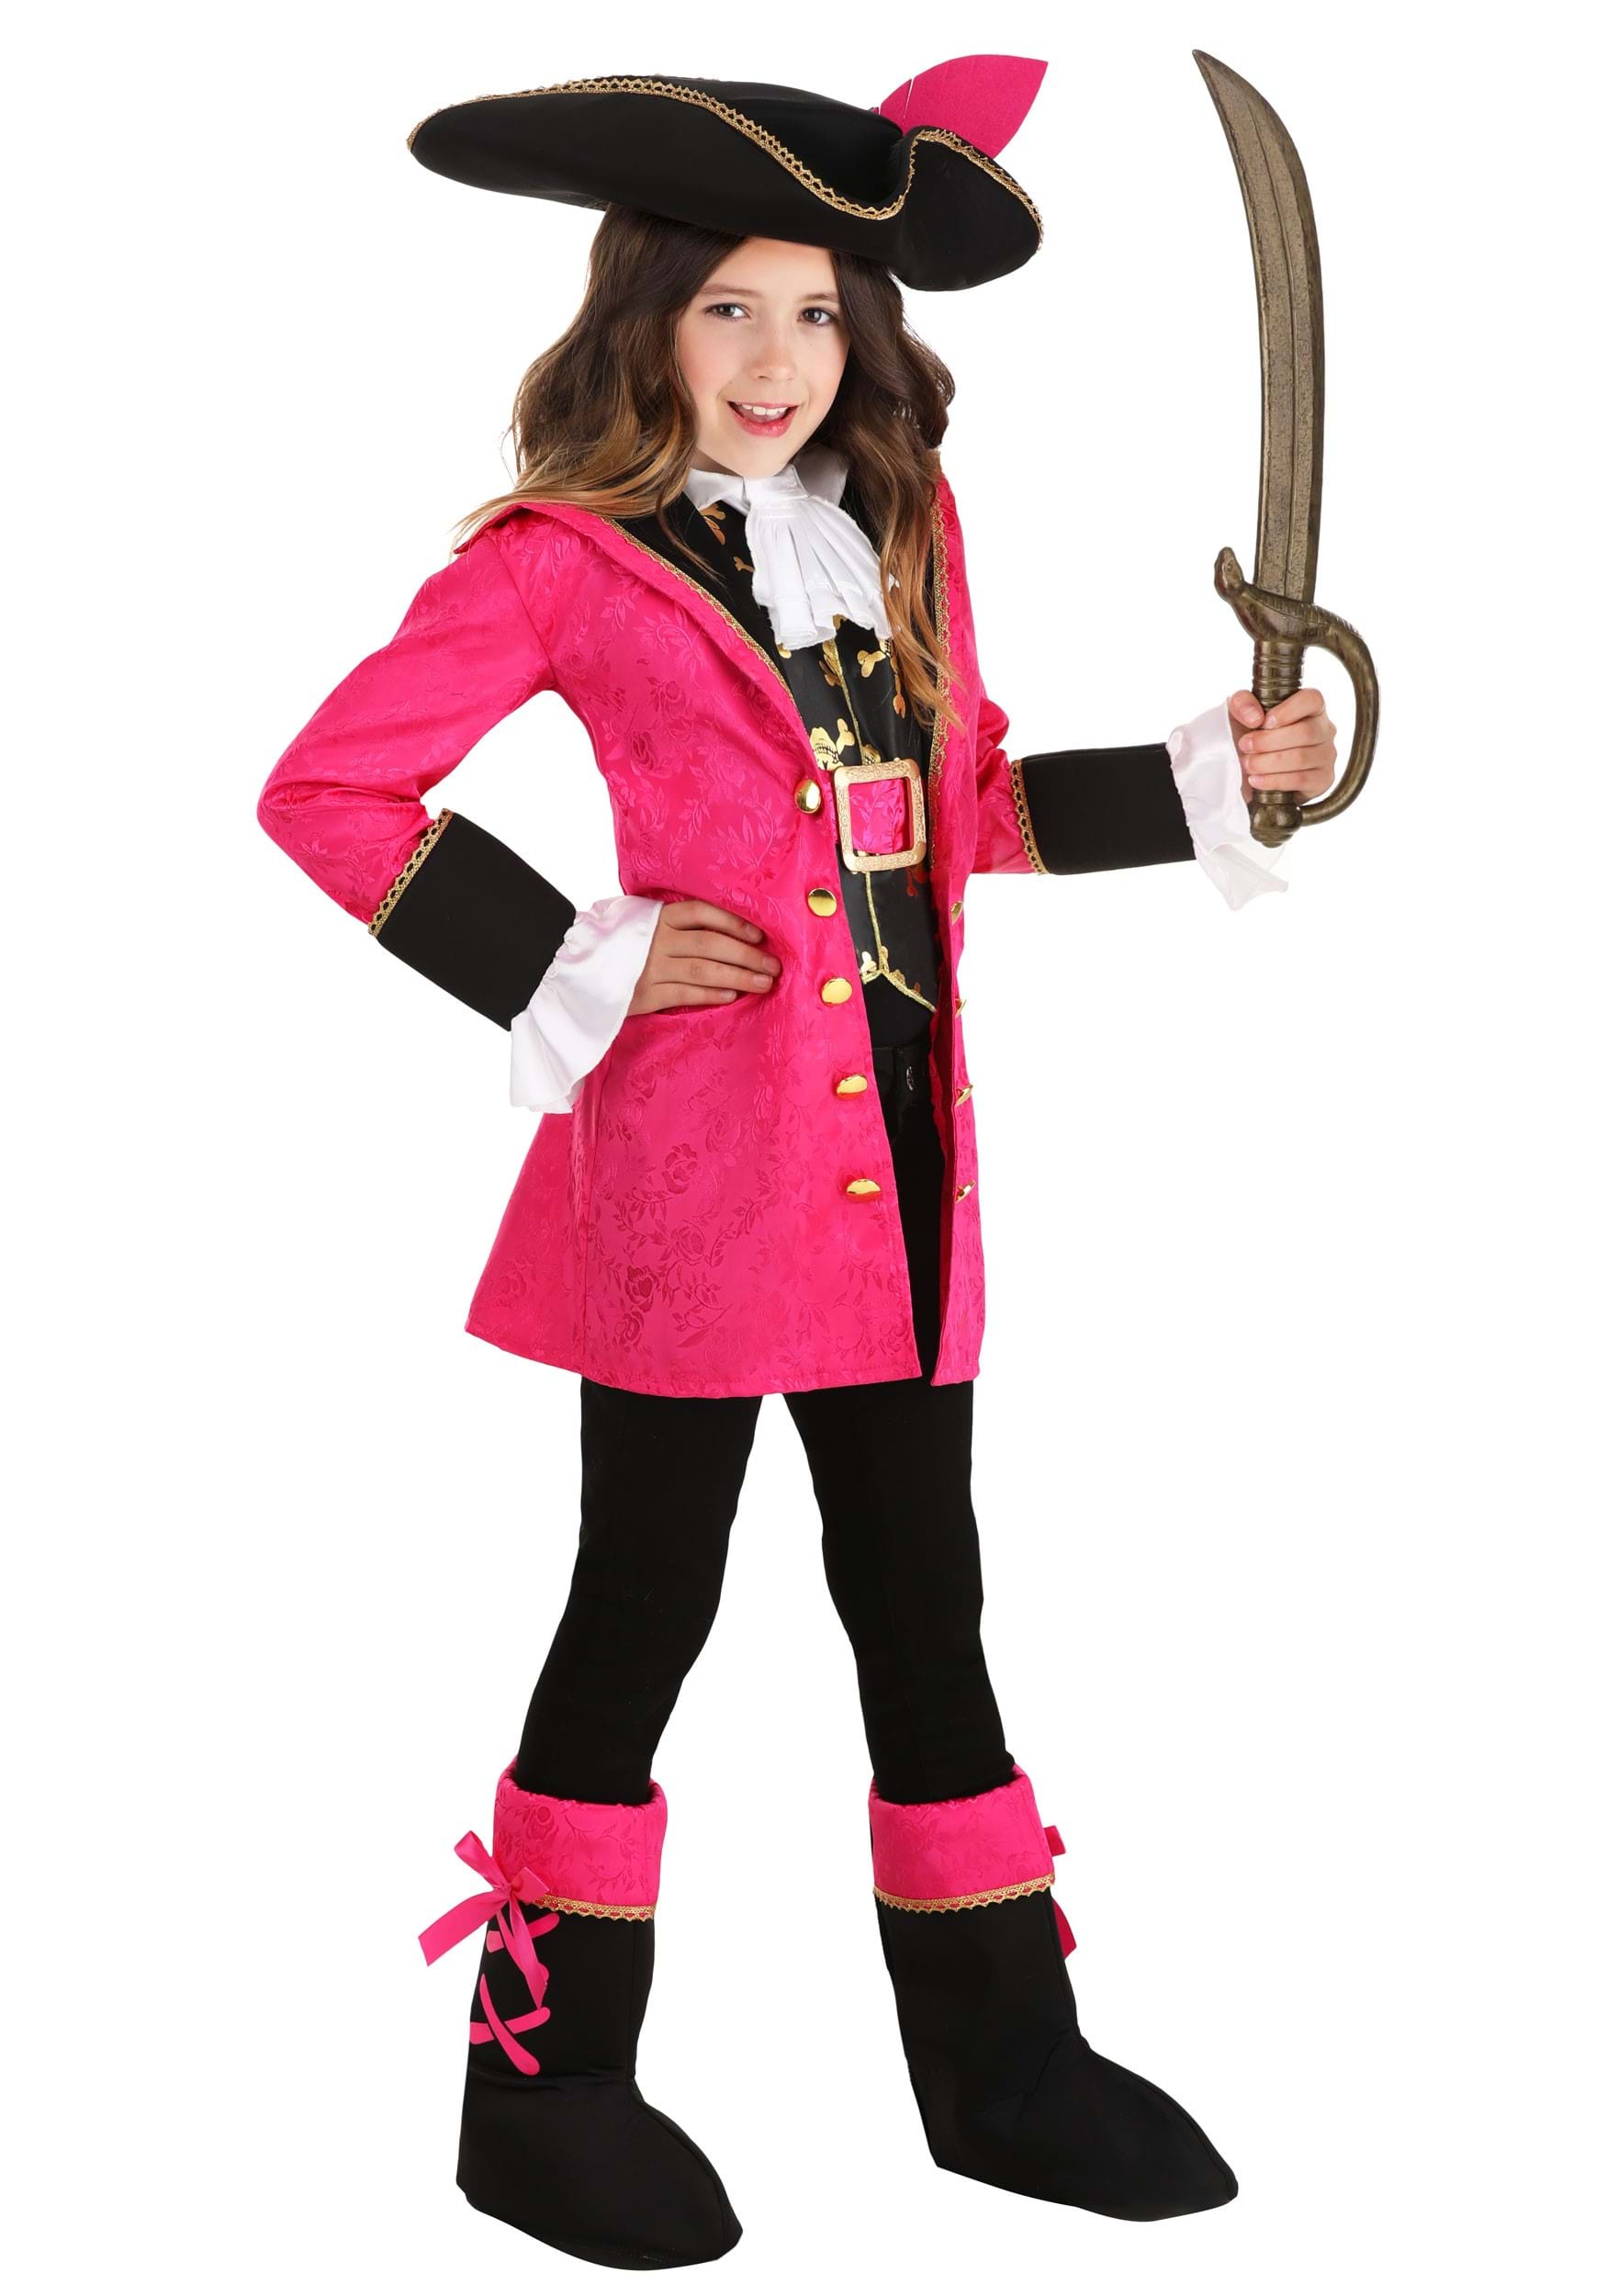 Pink Pirate Skull & Bones Halloween Costume For 18" American Girl Doll Clothes 